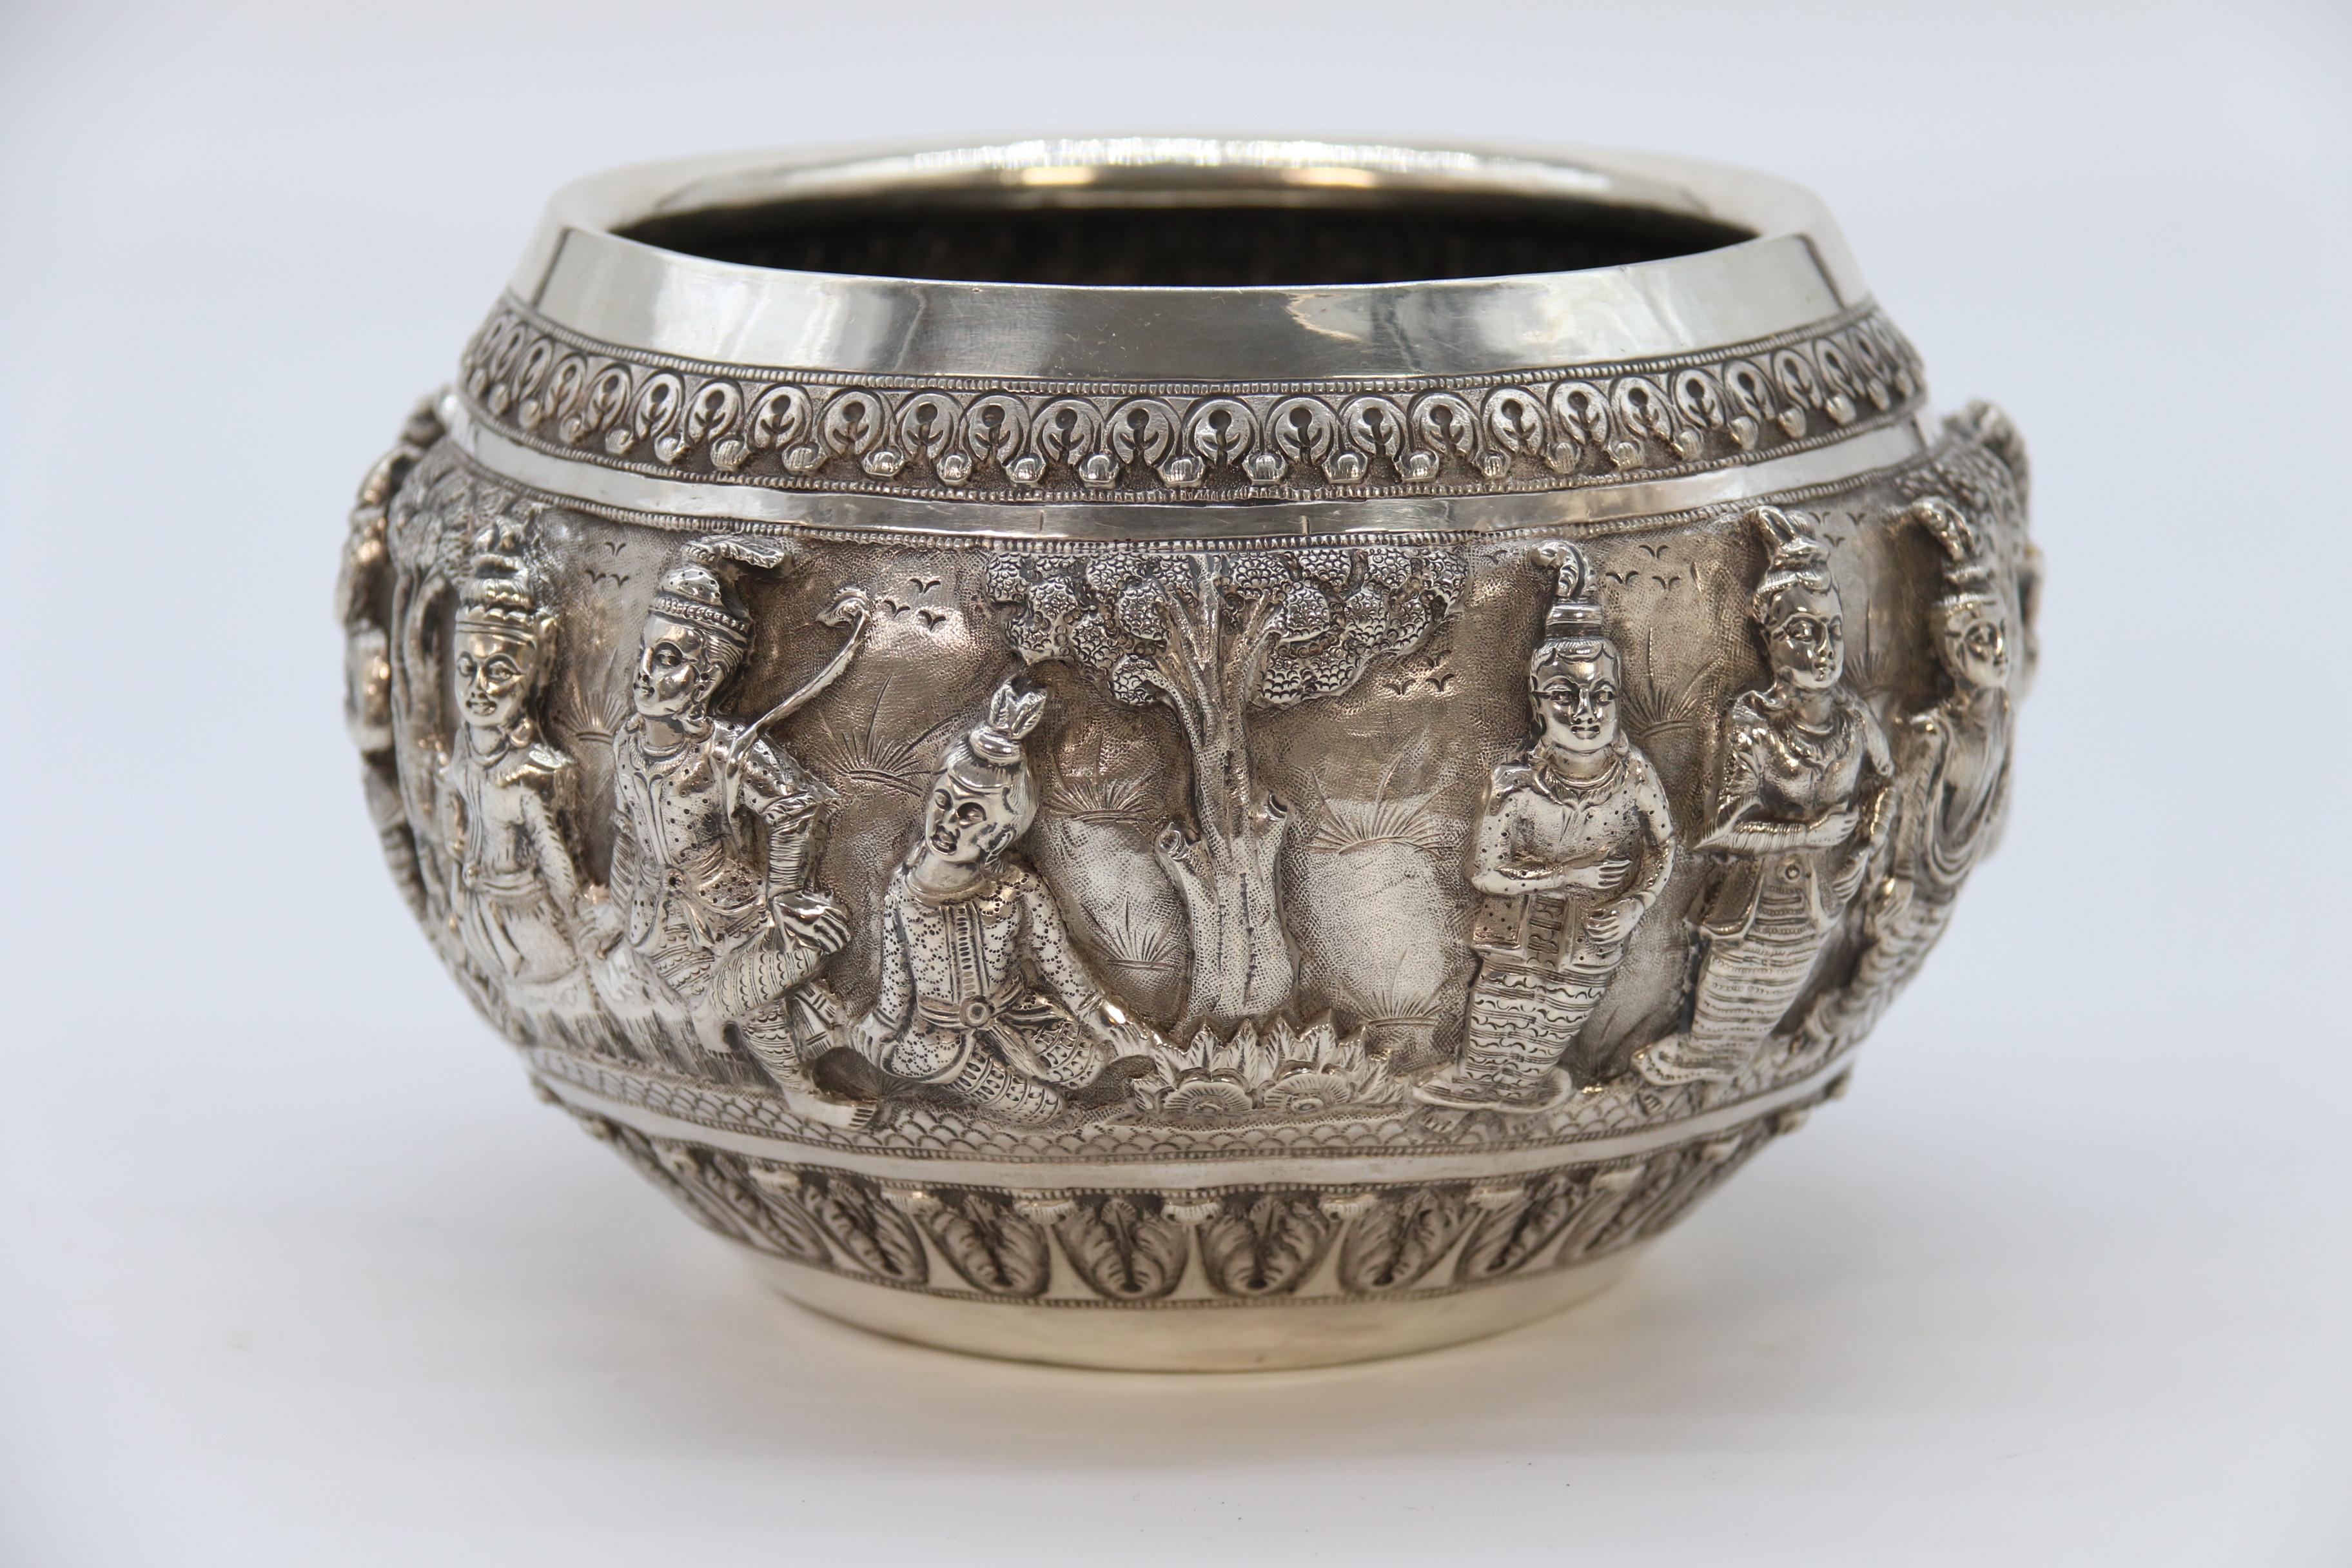 
This very high quality piece of impressive Raj period Indian silver is superbly decorated with three dimensional deep relief repousse work in the form of traditional male and female figures carrying out various tasks and religious customs.

The